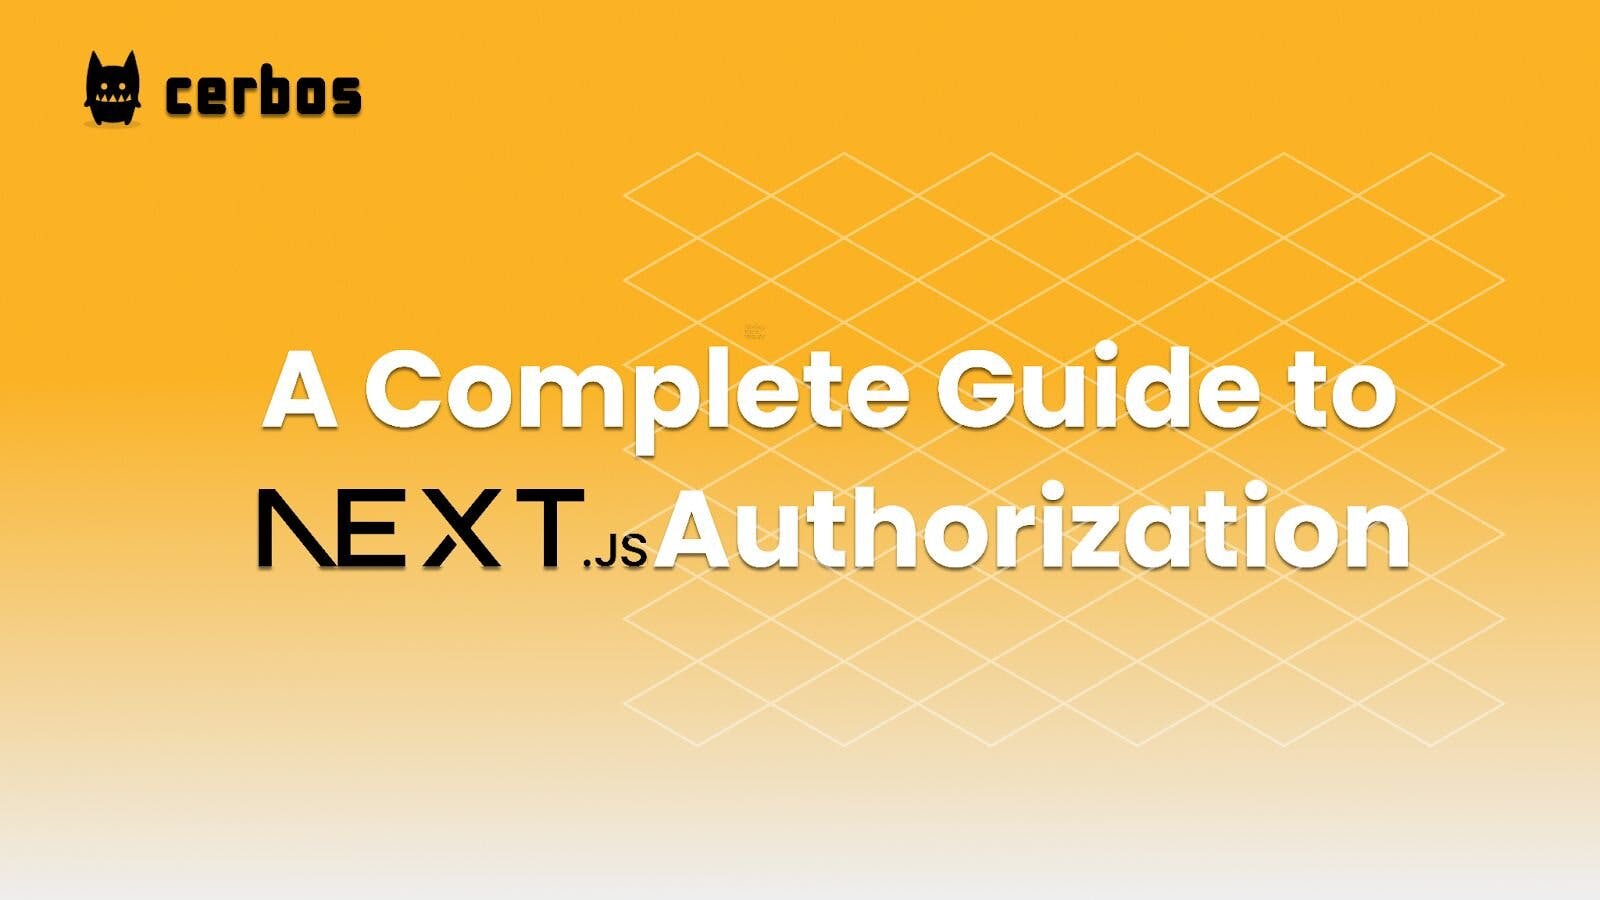 A Complete Guide to Next.js Authorization